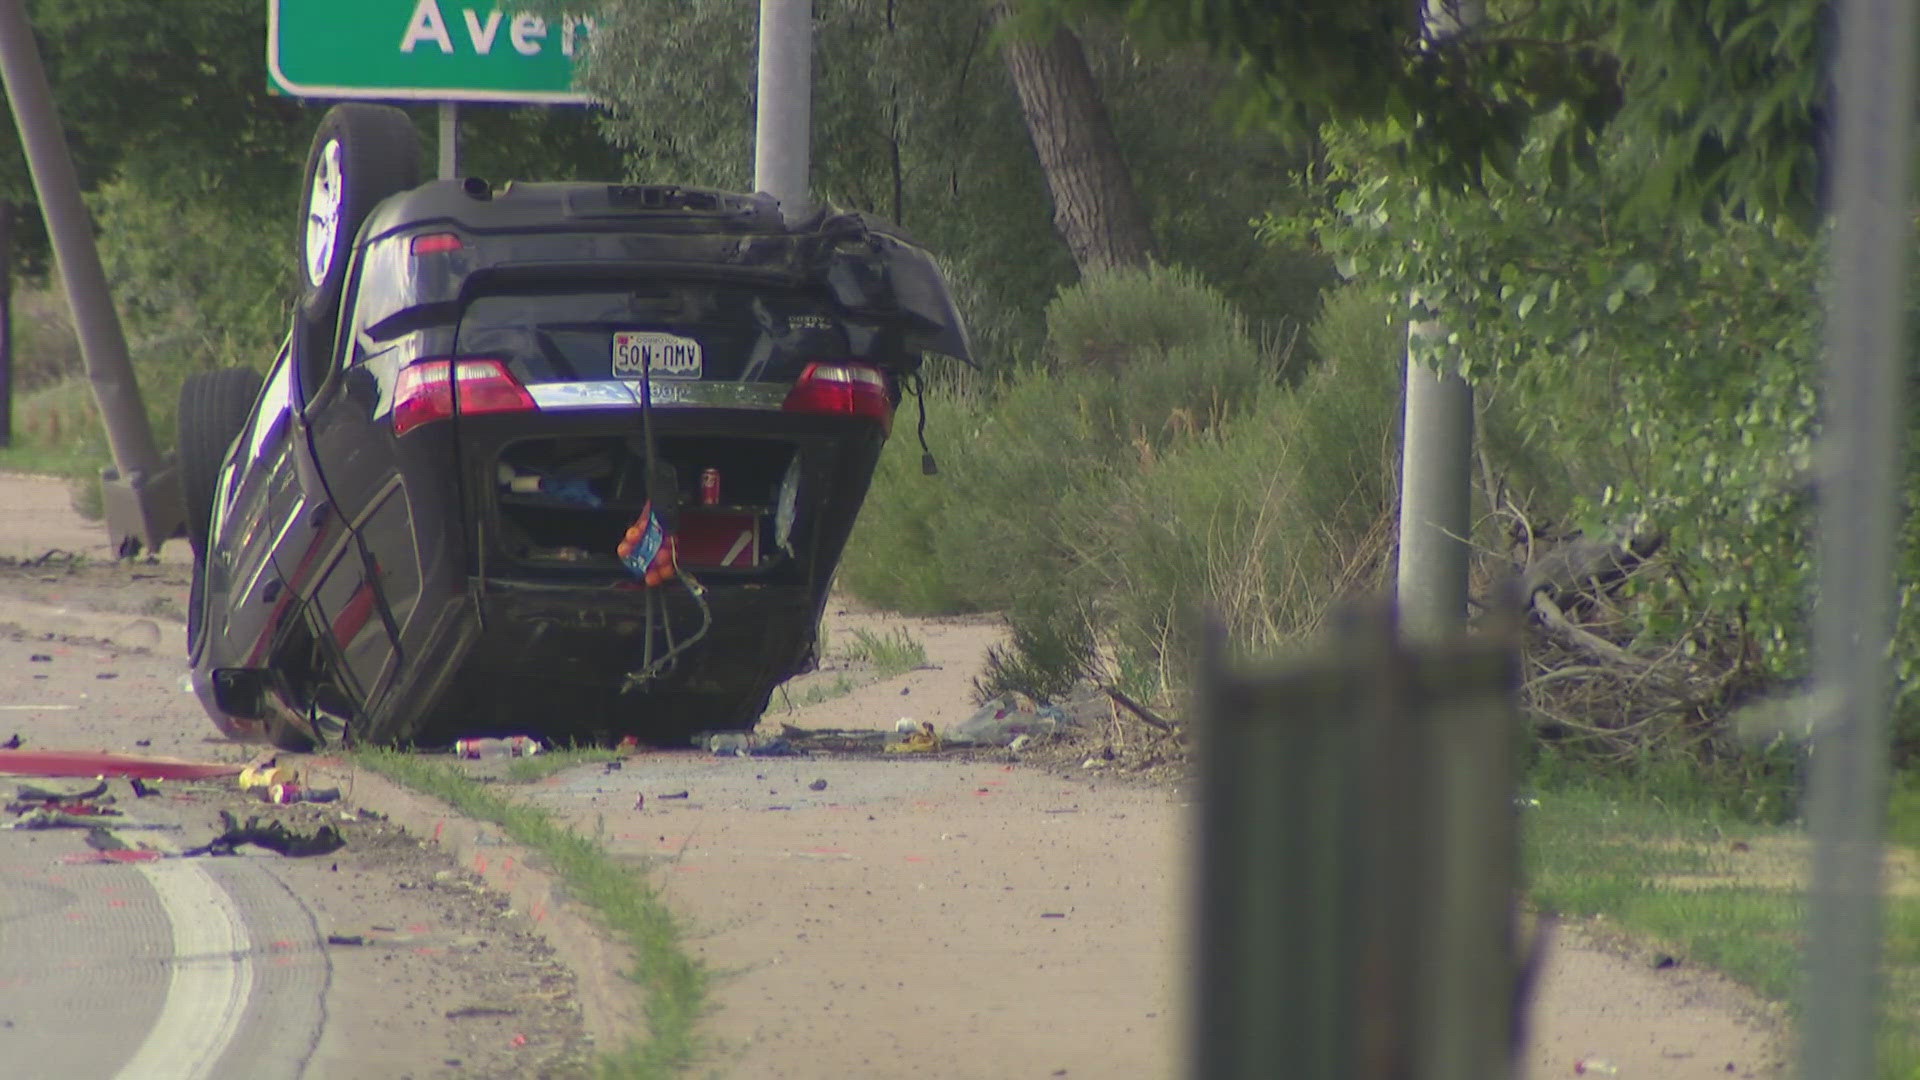 Police believe speed was a factor in the crash on northbound Parker Road Sunday afternoon.